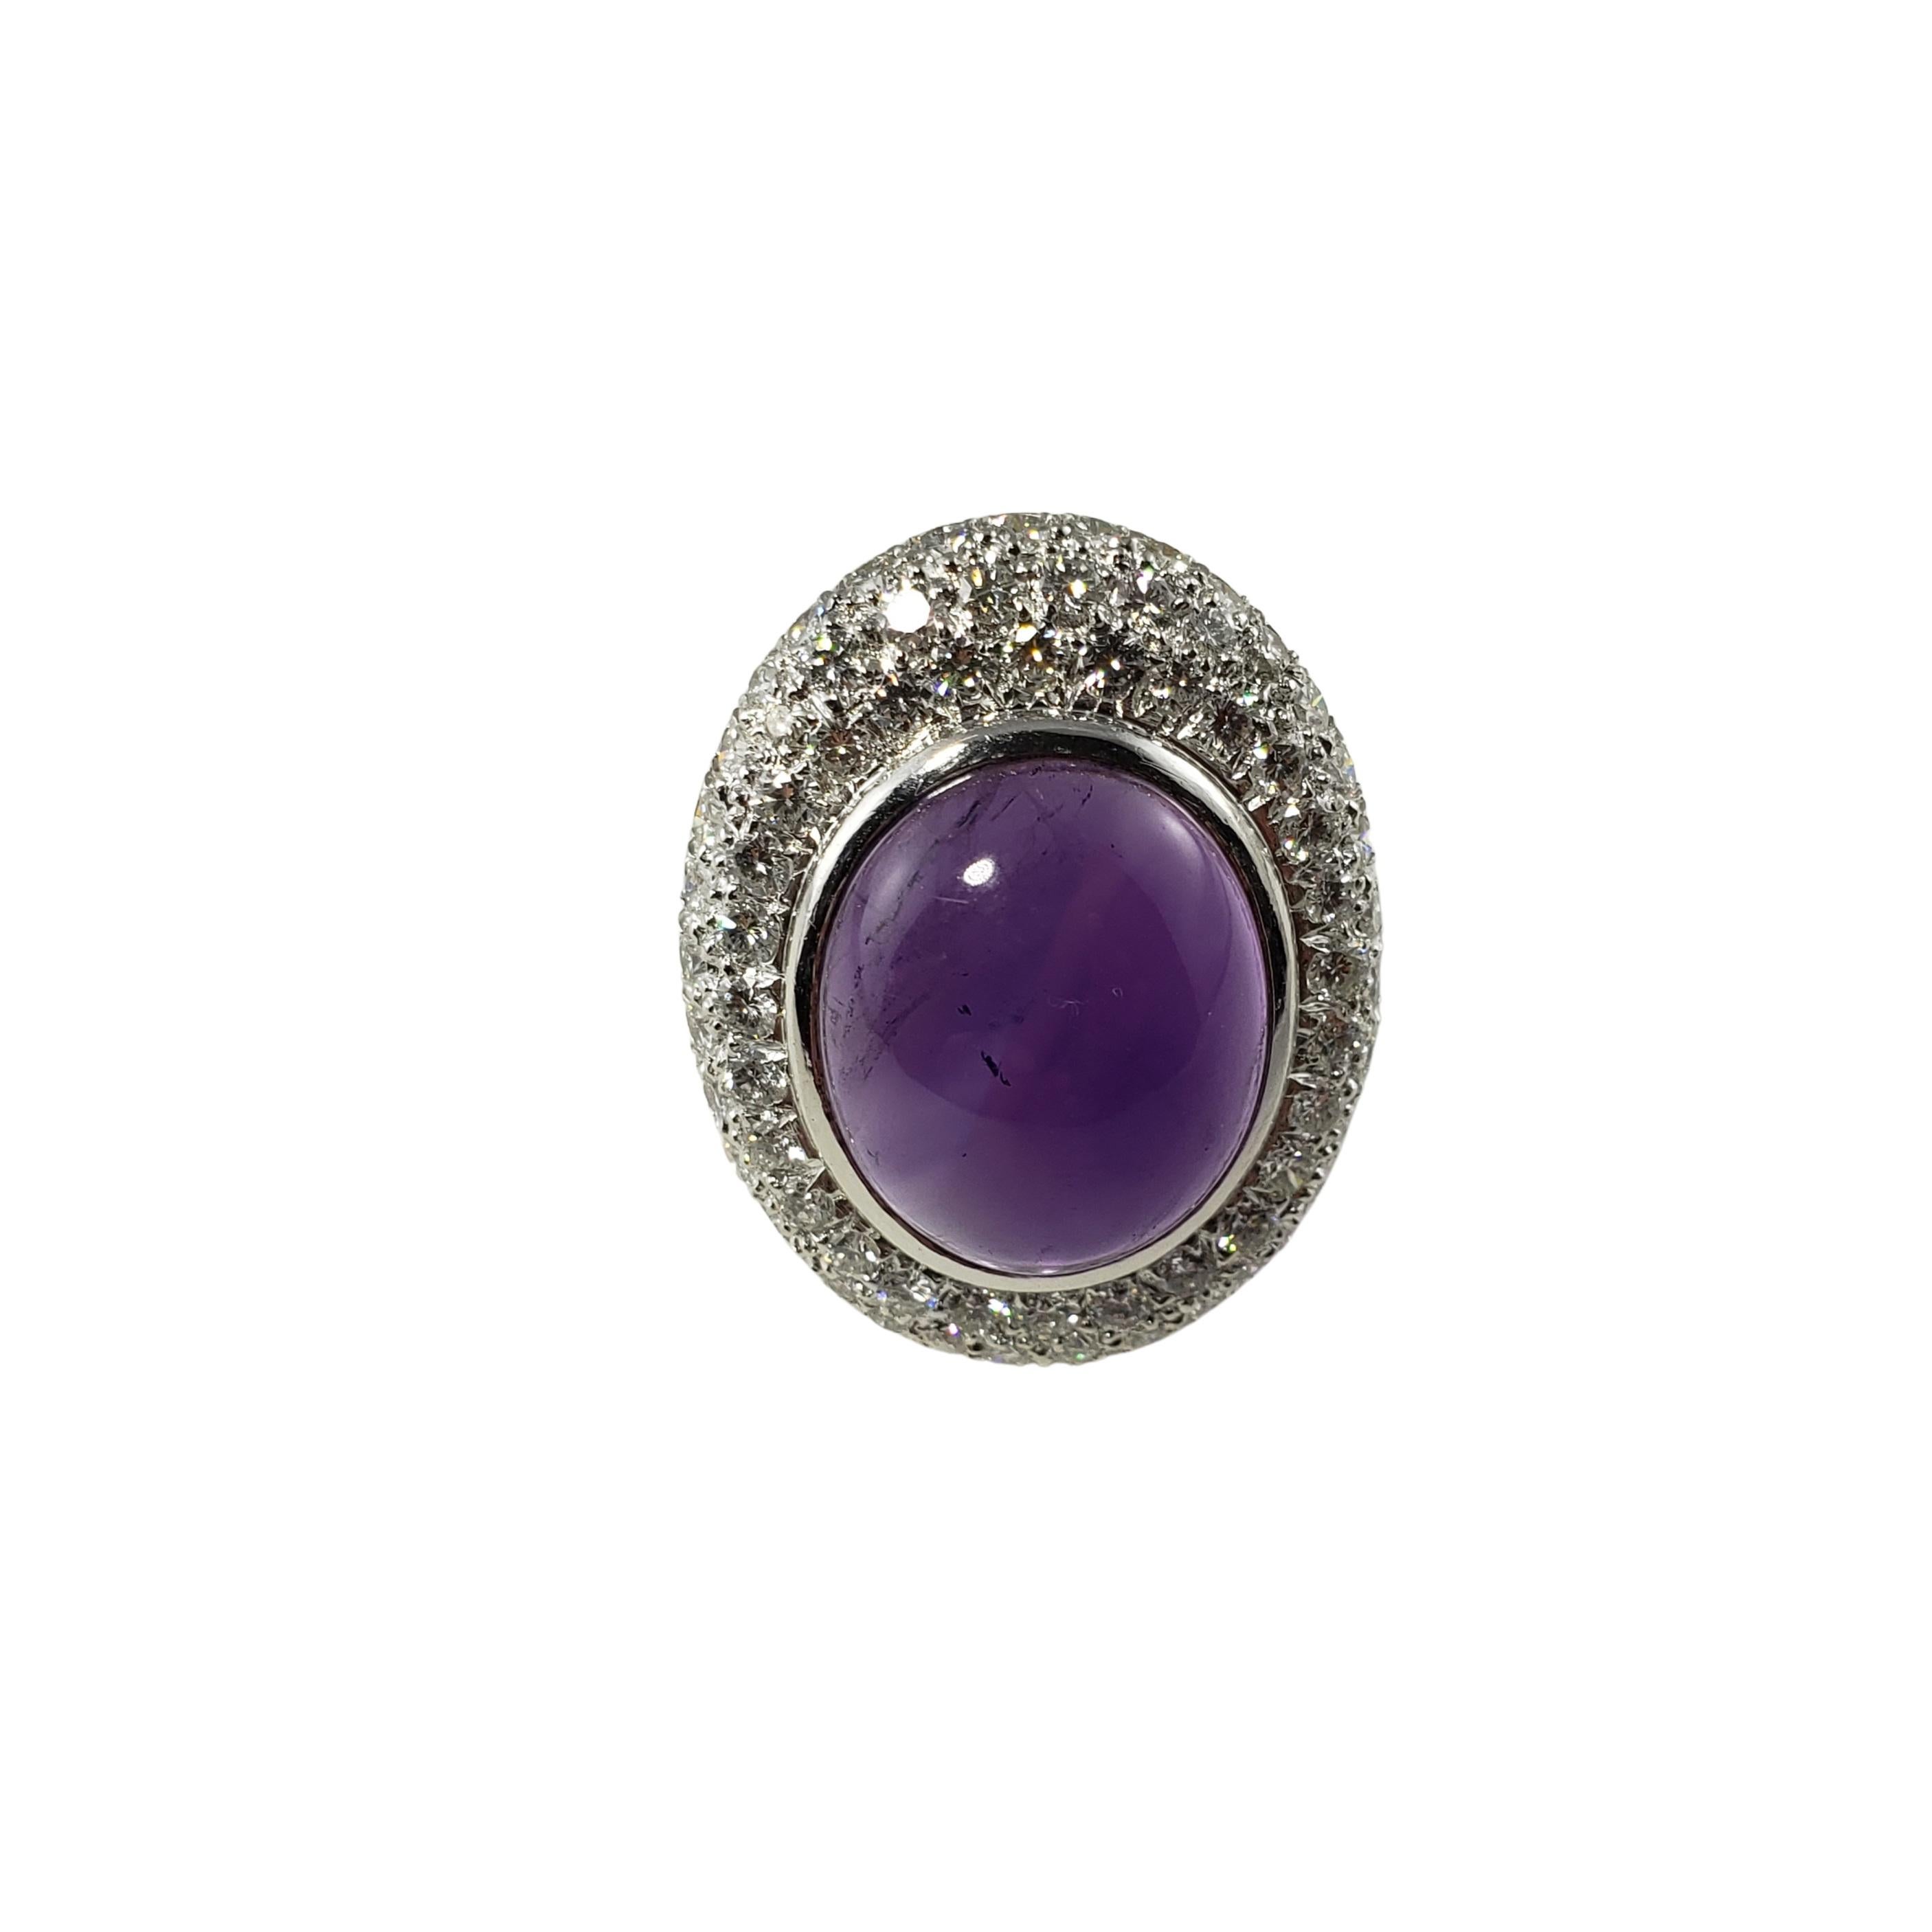 Vintage 18 Karat White Gold Amethyst and Diamond Ring Size 7.75 GAI Certified-

This stunning ring features one oval cabochon amethyst (17 mm x 15 mm) and 129 round brilliant cut diamonds set in meticulously detailed 18K white gold. Top of ring